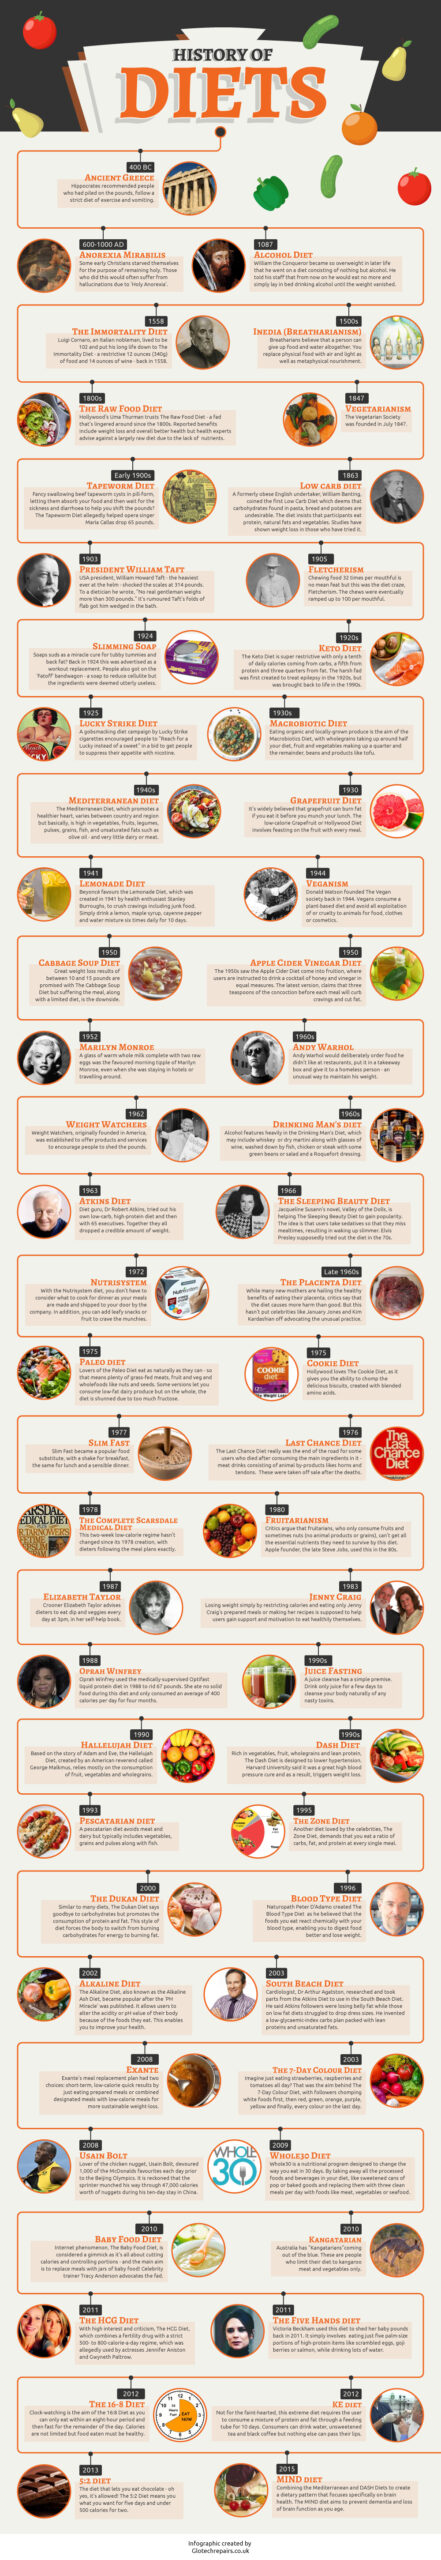 The history of dieting